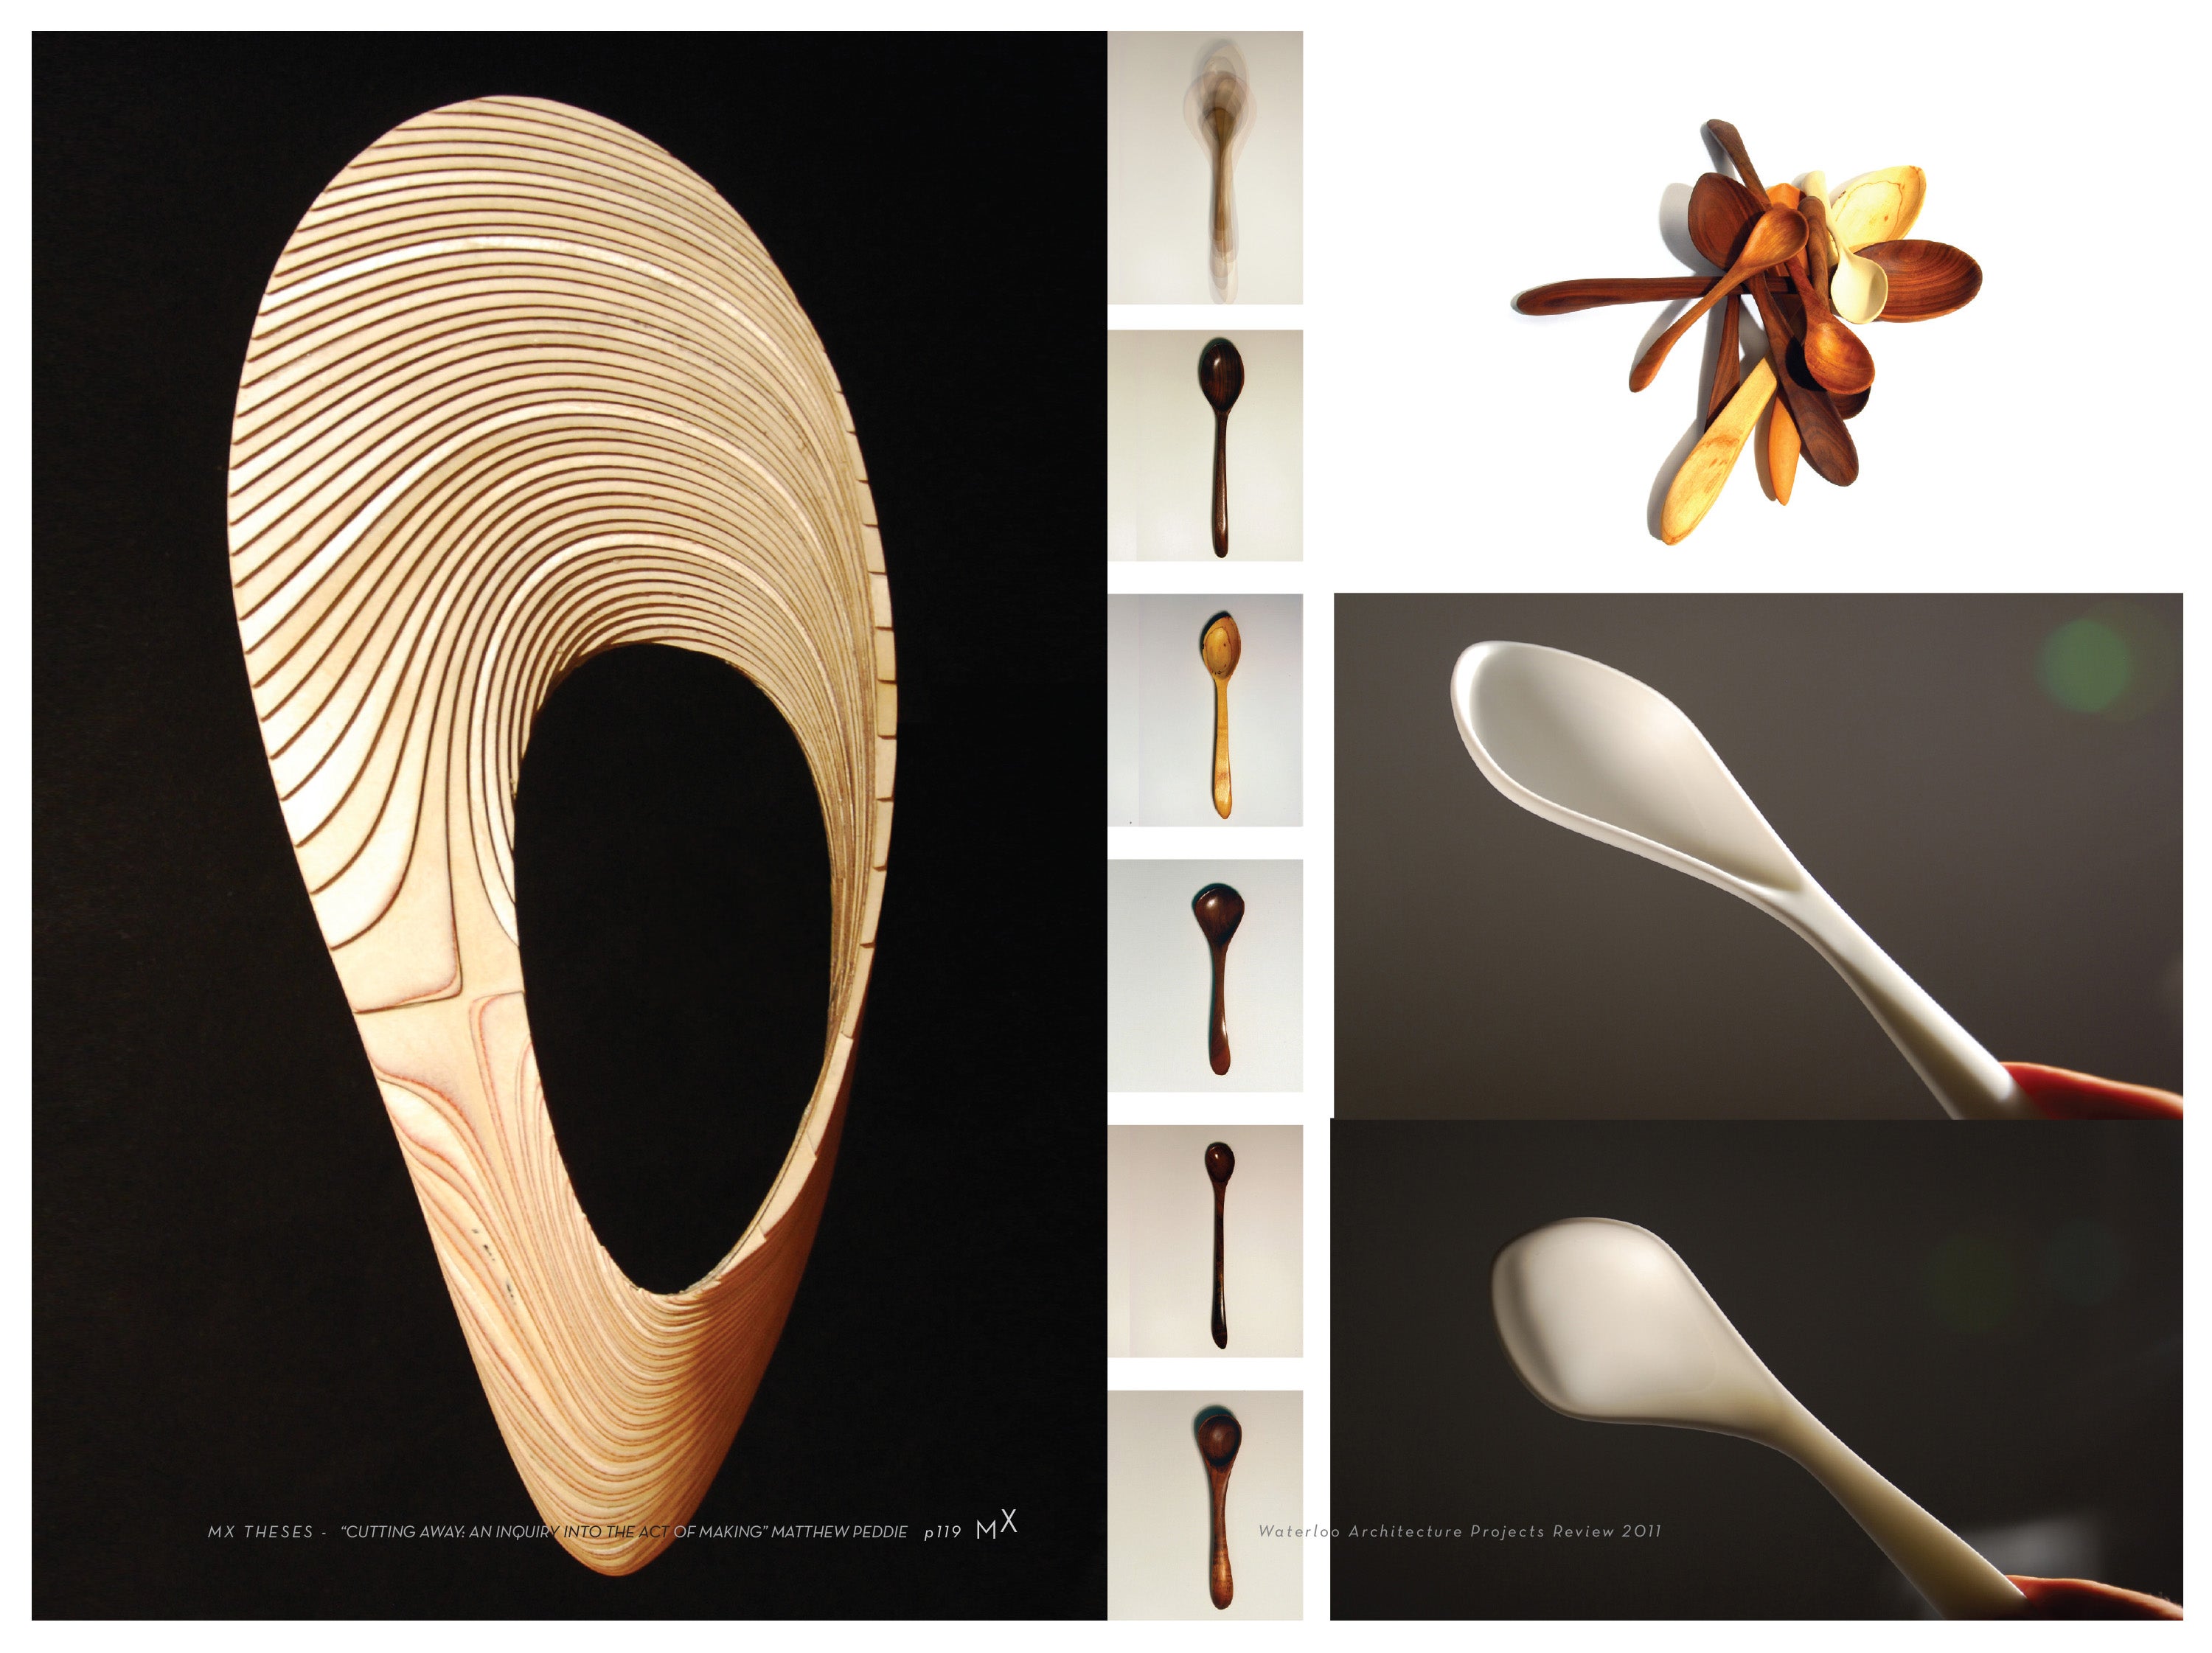 Several wooden spoon like, free flowing and circular sculptures.